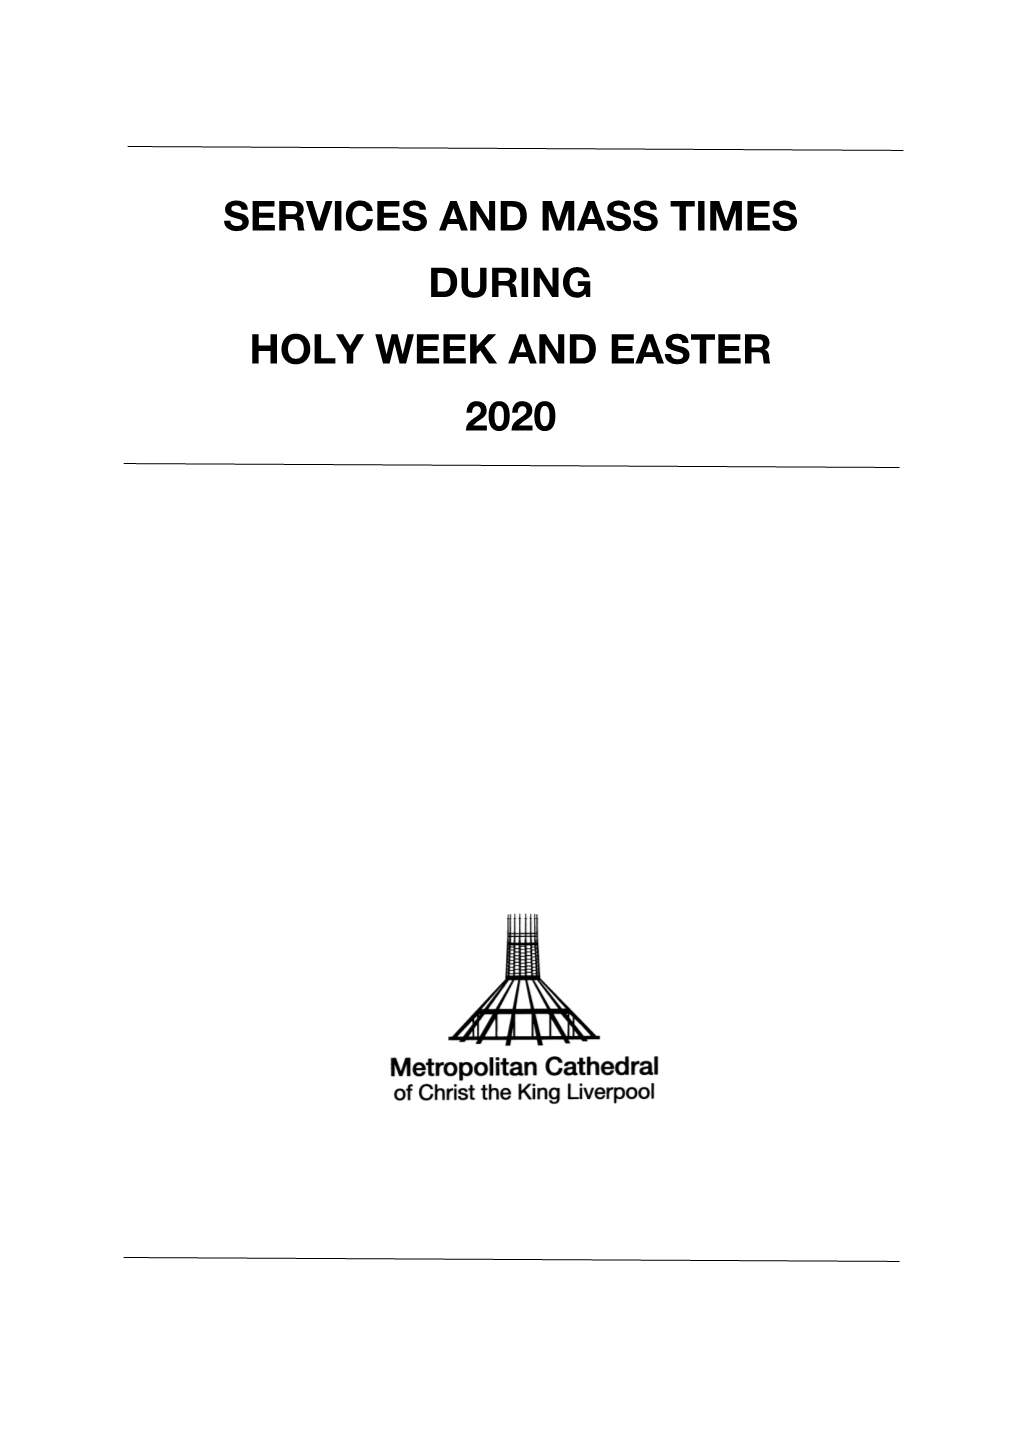 Services and Mass Times During Holy Week and Easter 2020